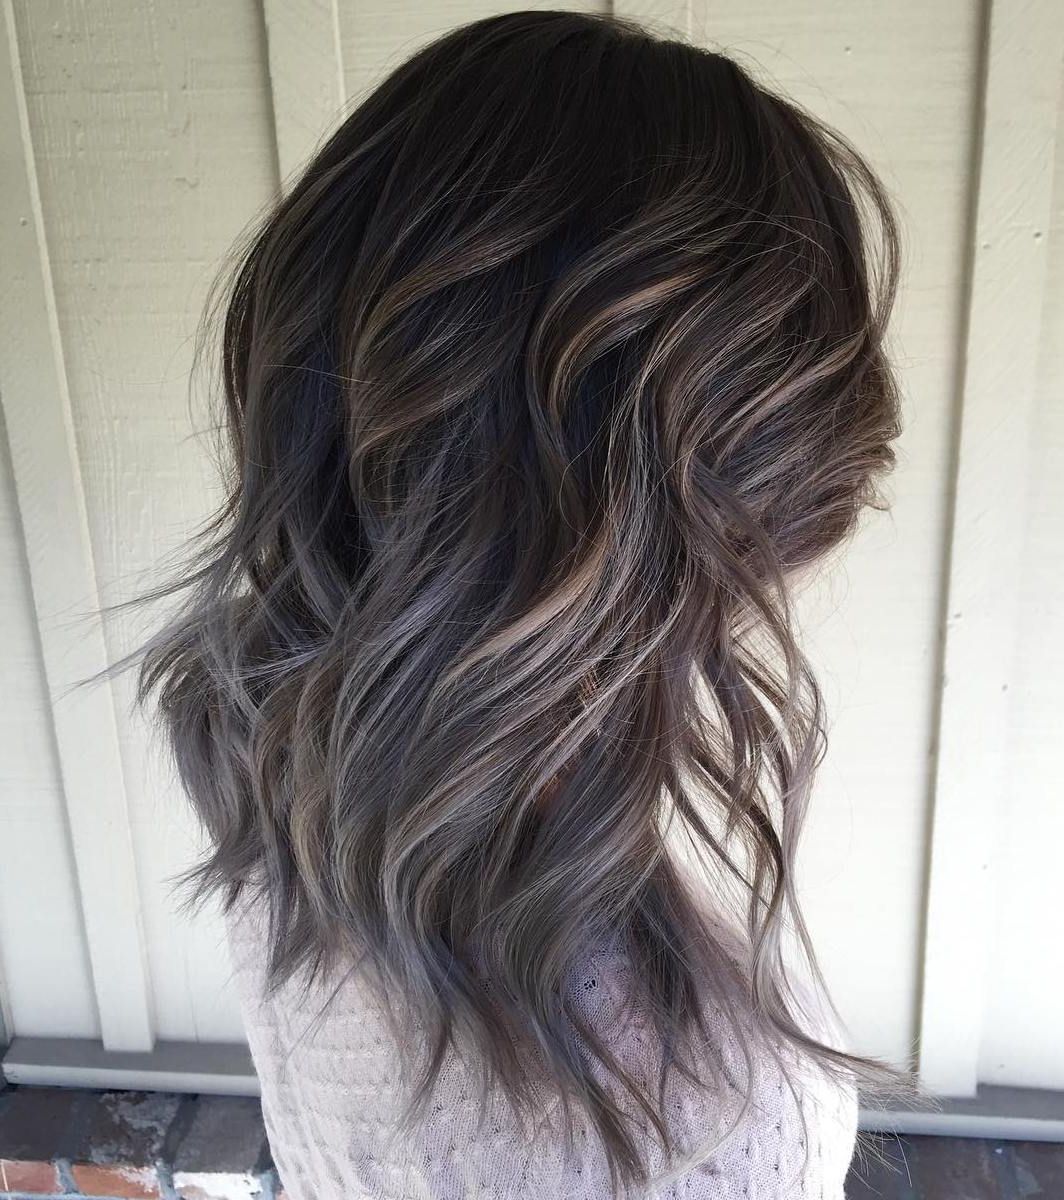 45 Ideas Of Gray And Silver Highlights On Brown Hair Pertaining To Popular Loose Layers Hairstyles With Silver Highlights (View 2 of 20)